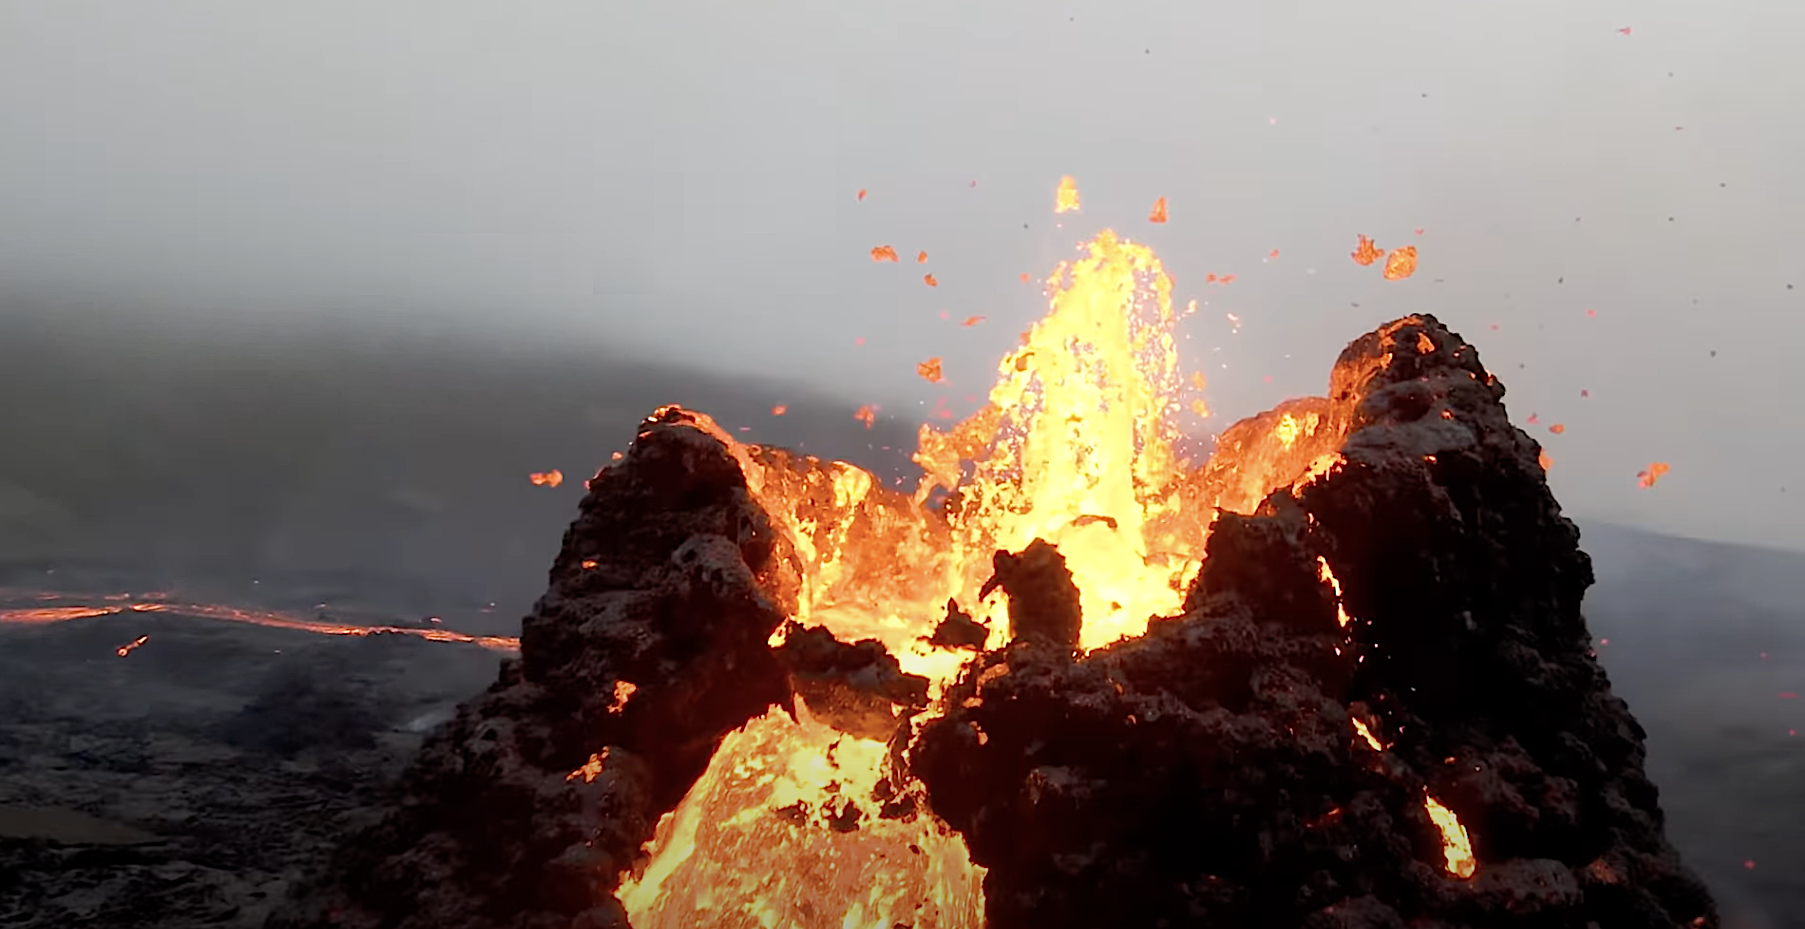 Iceland volcano eruption as seen by a drone